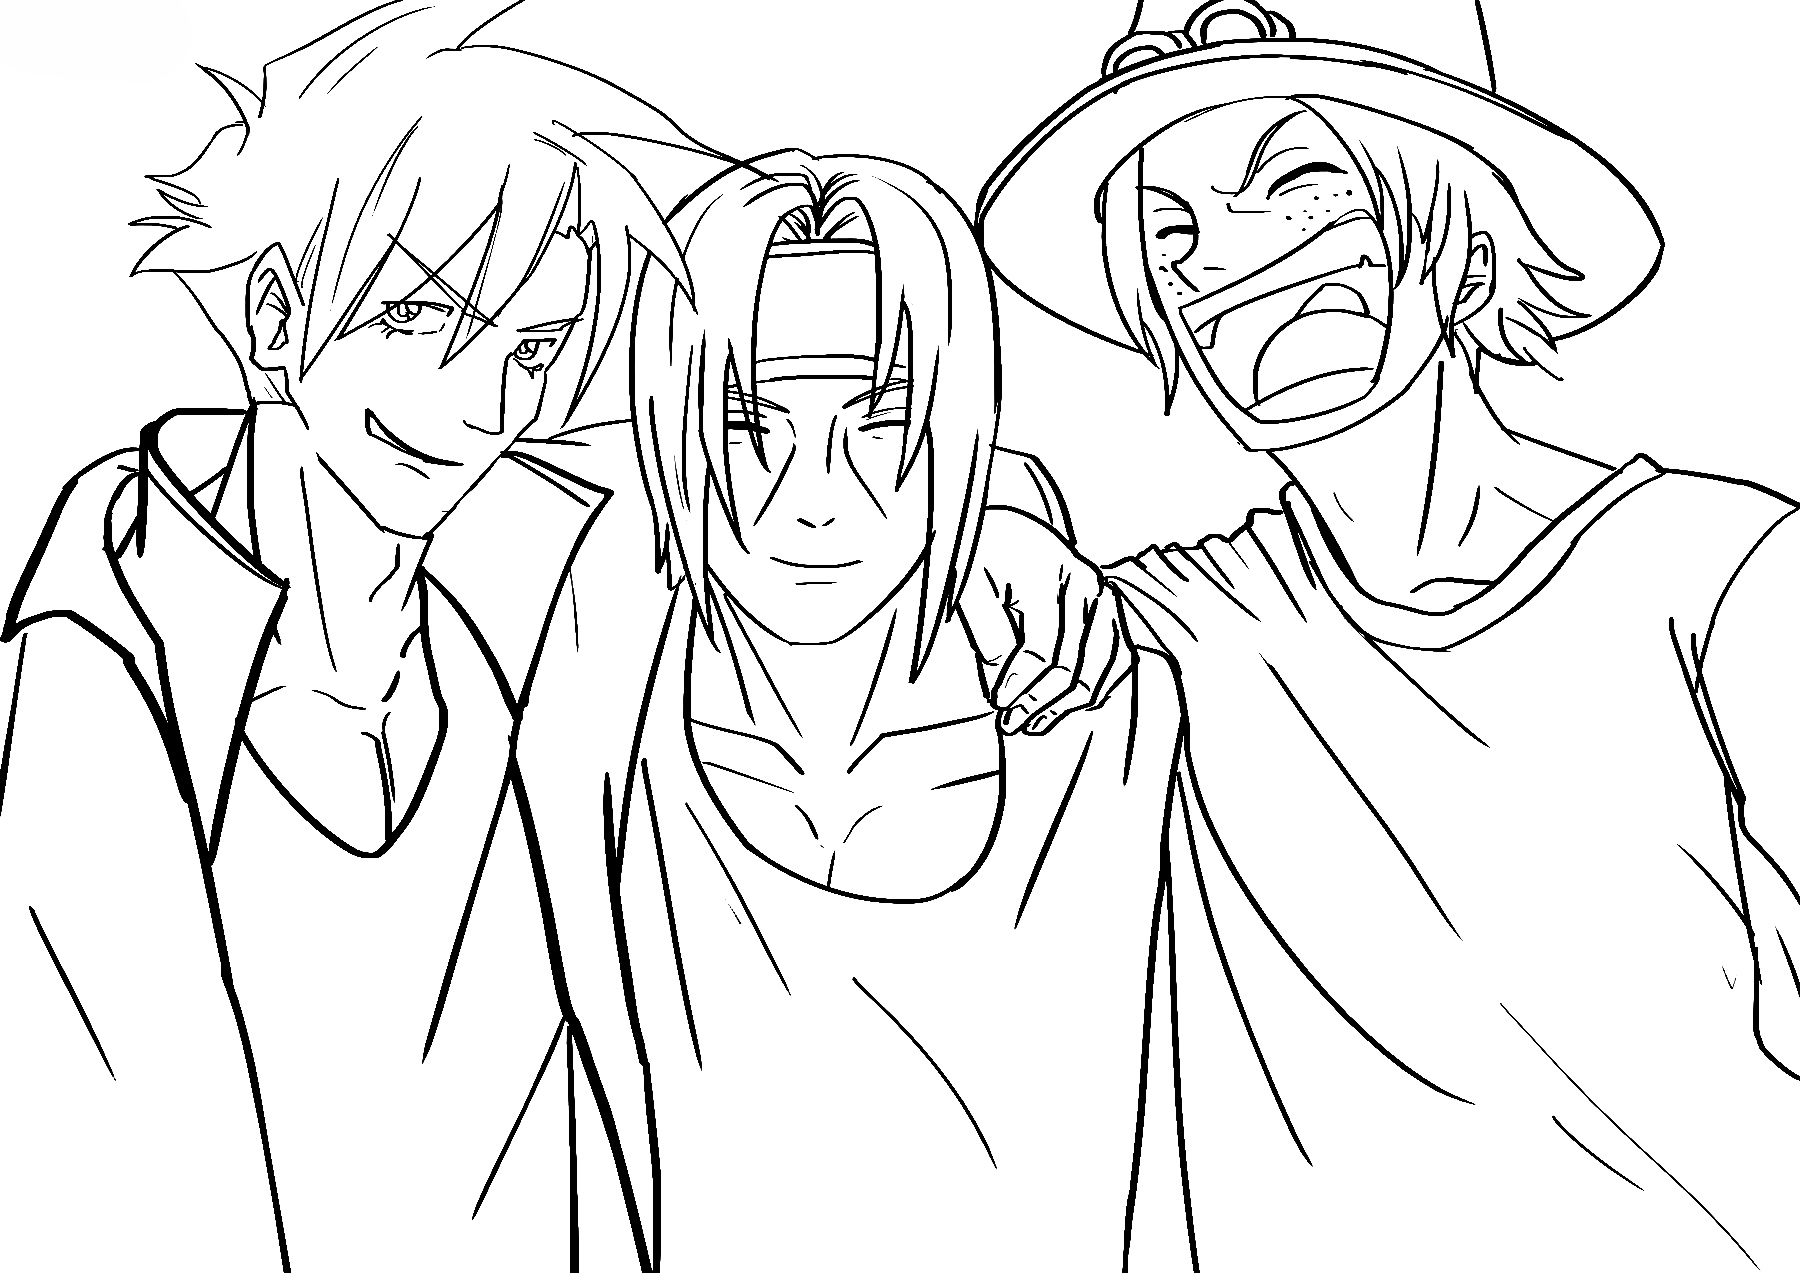 Coloring page Itachi Uchiha and his friends